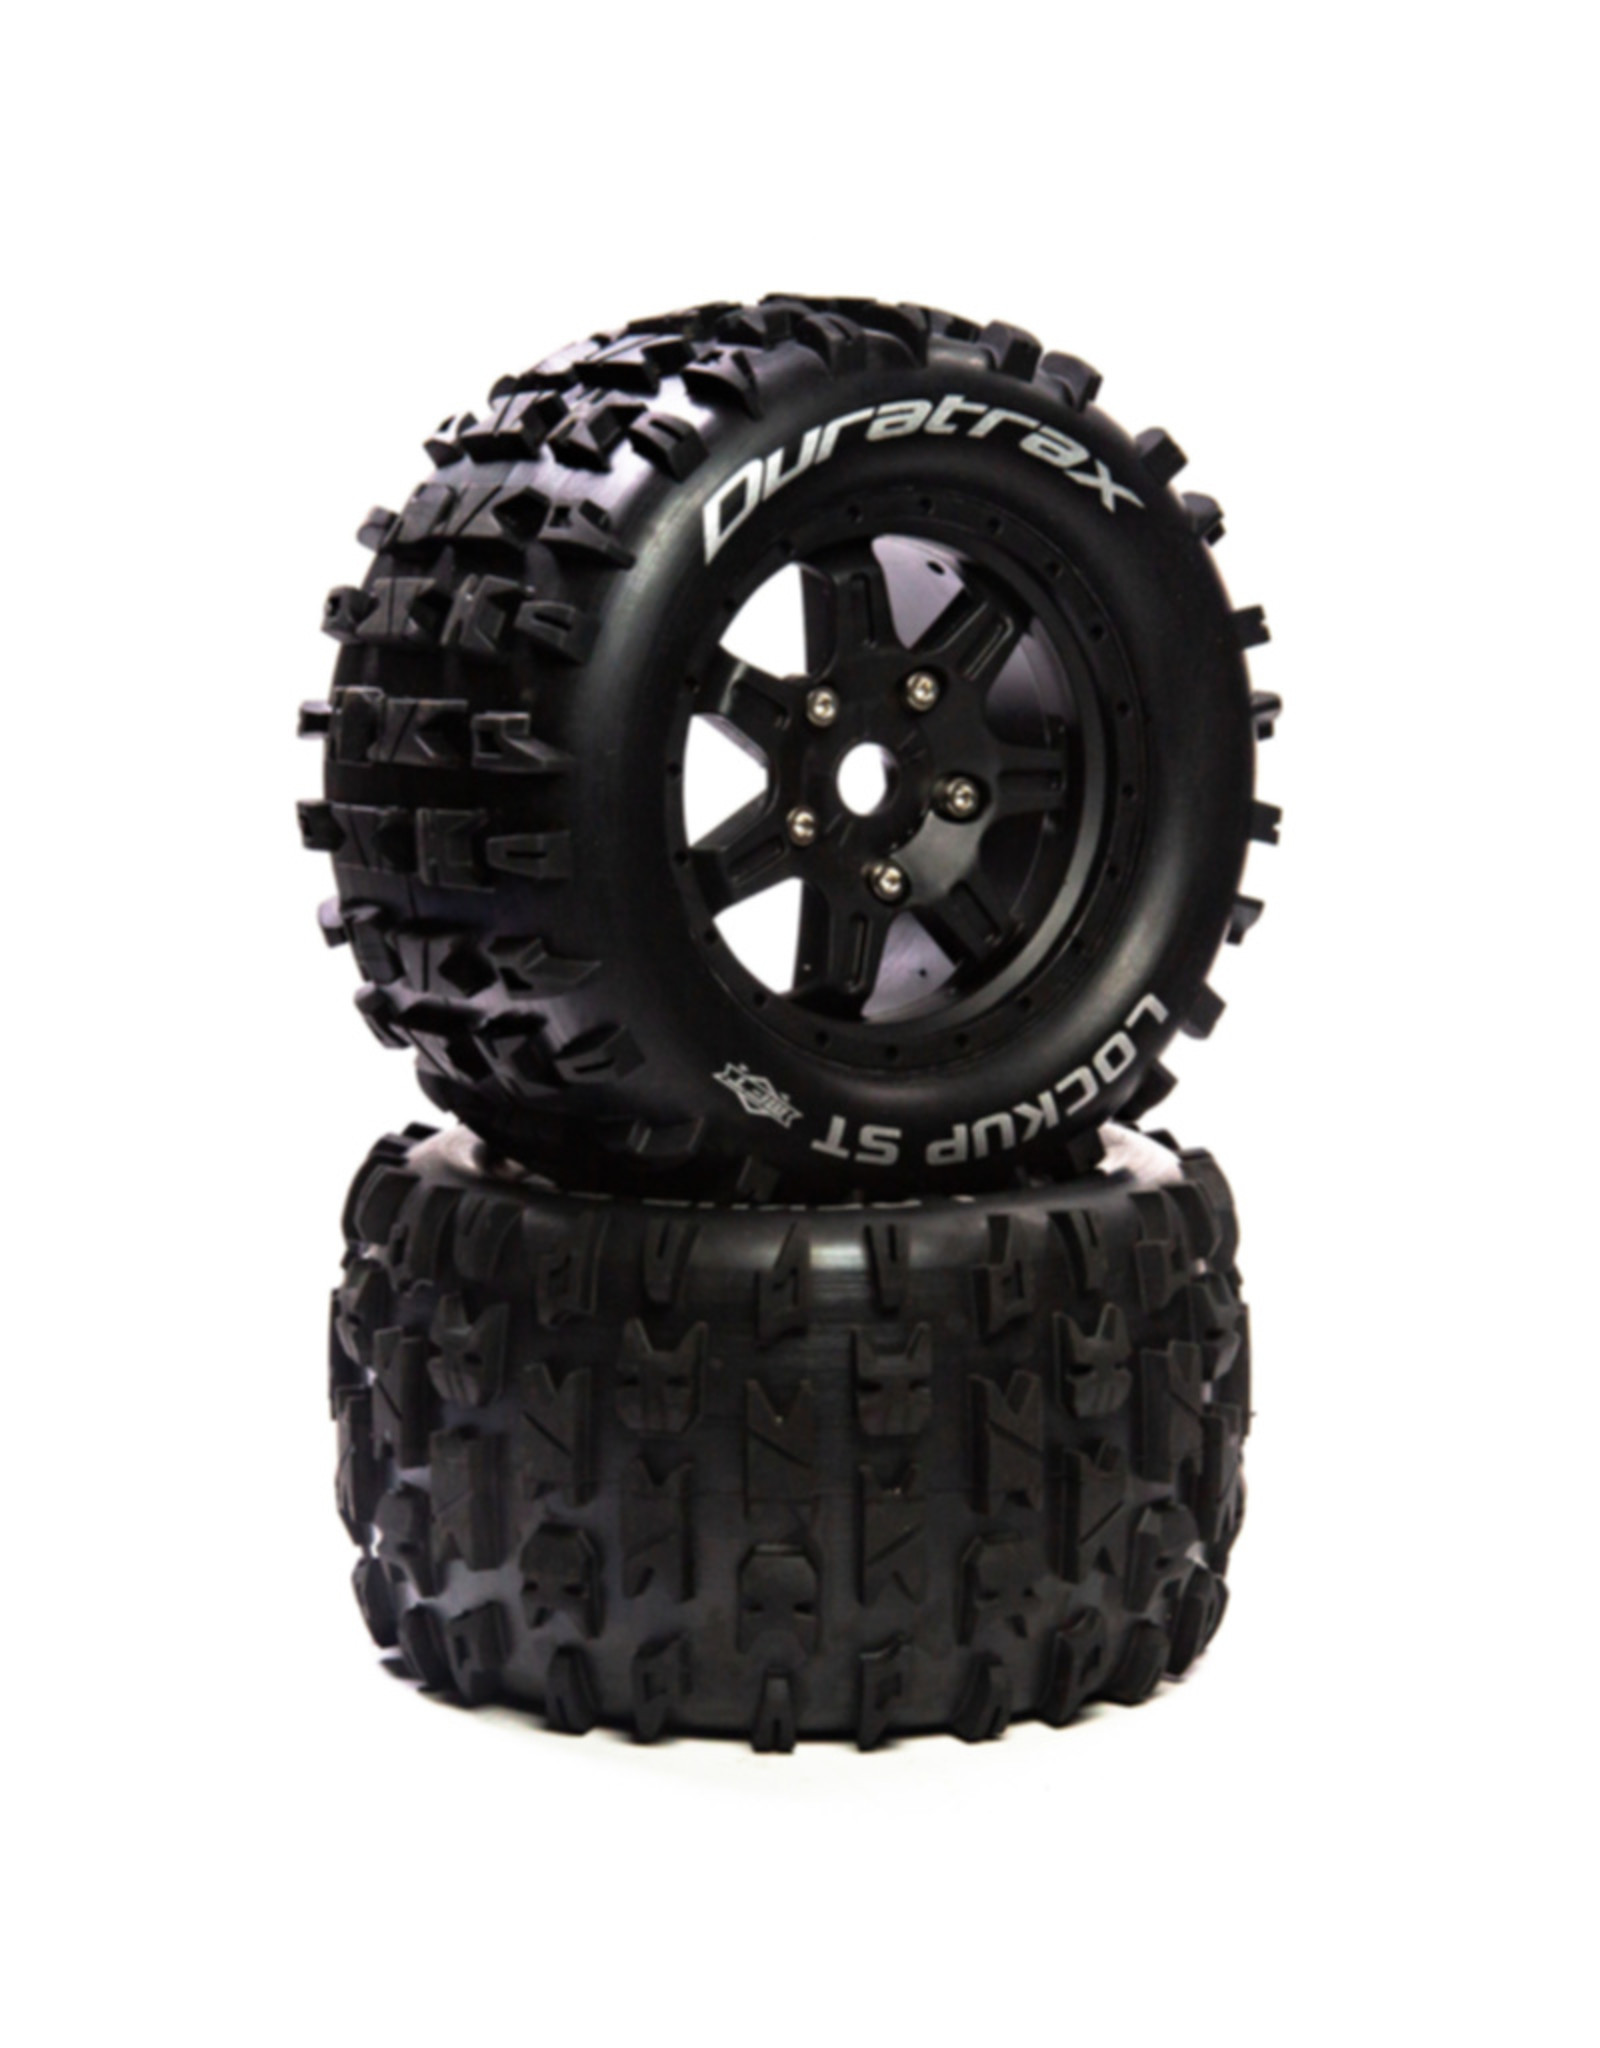 Duratrax DTXC5614  Lockup ST Belt 3.8" Mounted Front/Rear Tires 0 Offset 17mm, Black (2)